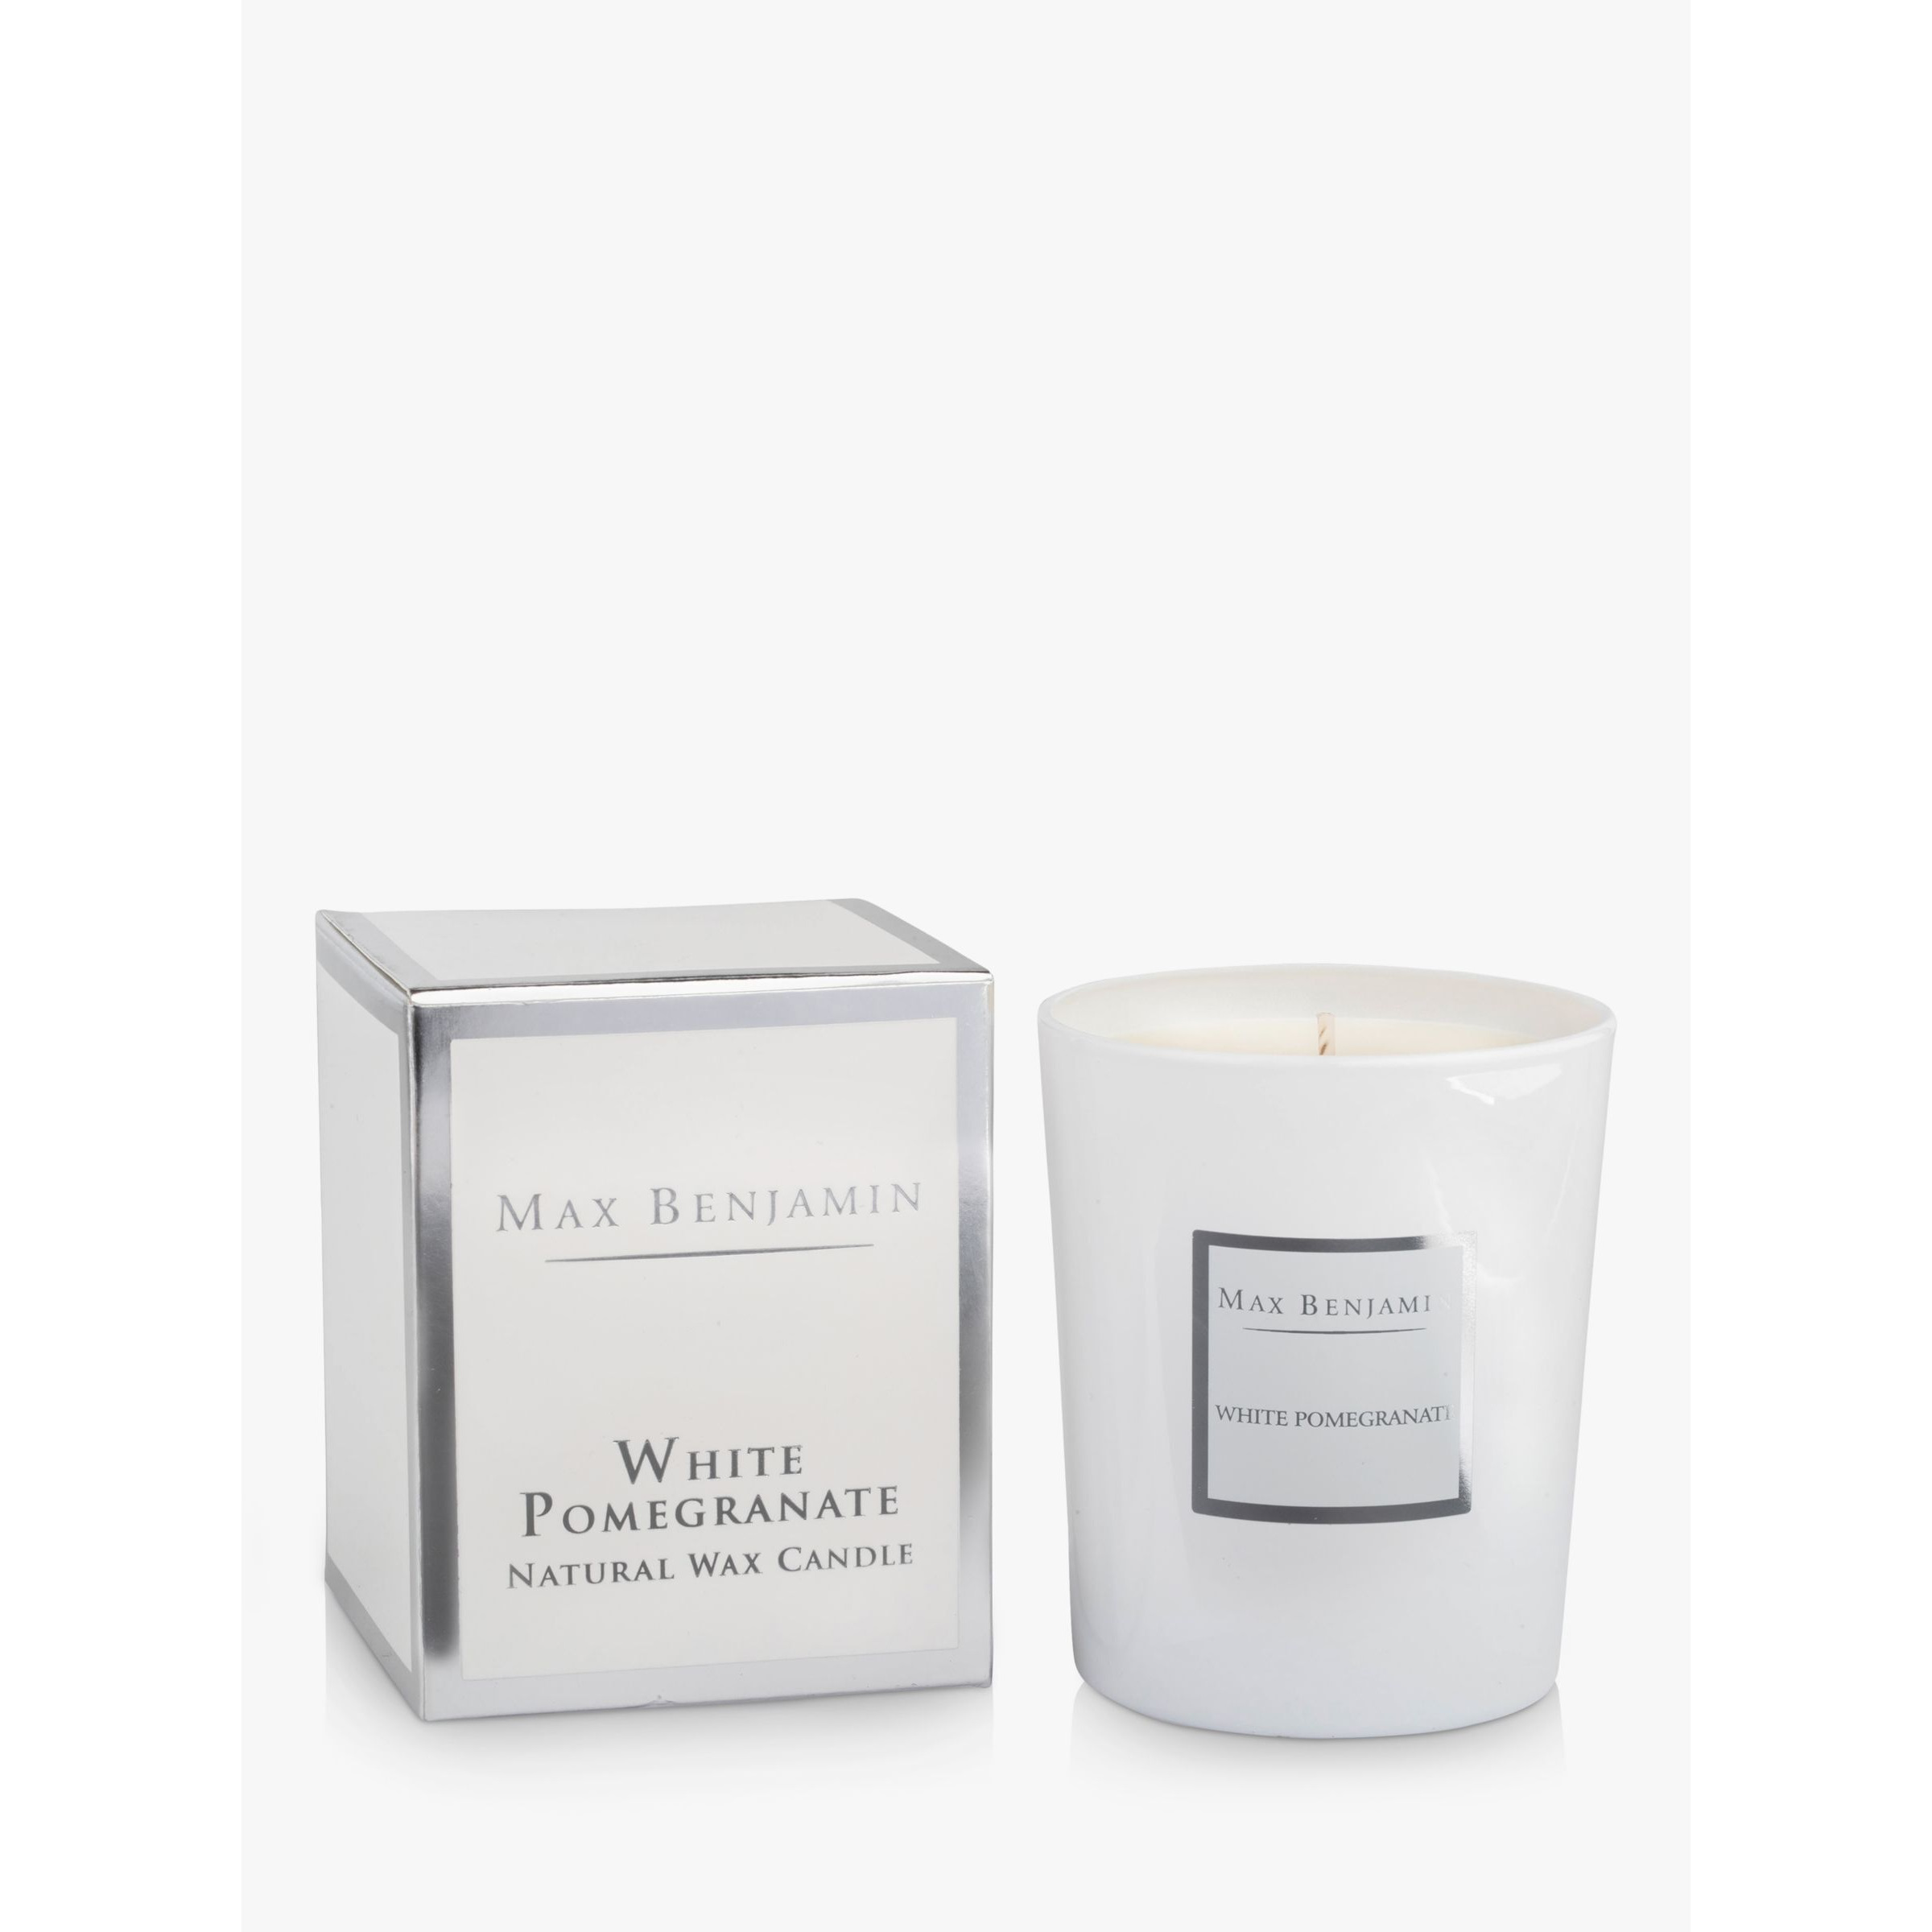 Max Benjamin Classic White Pomegrante Scented Candle, 190g - image 1